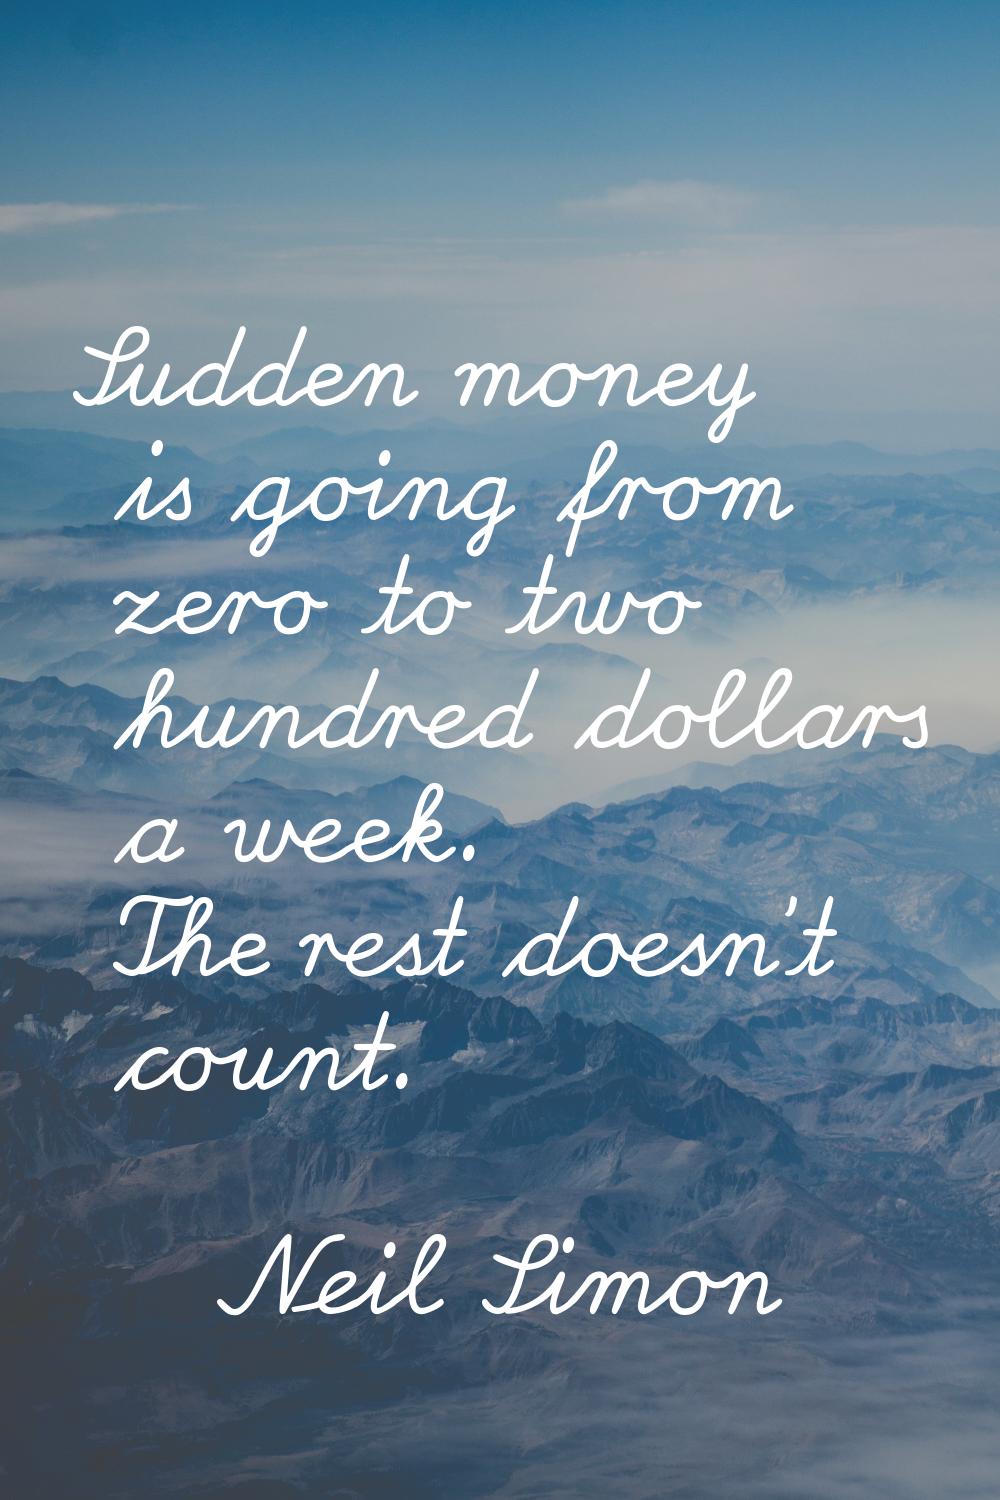 Sudden money is going from zero to two hundred dollars a week. The rest doesn't count.